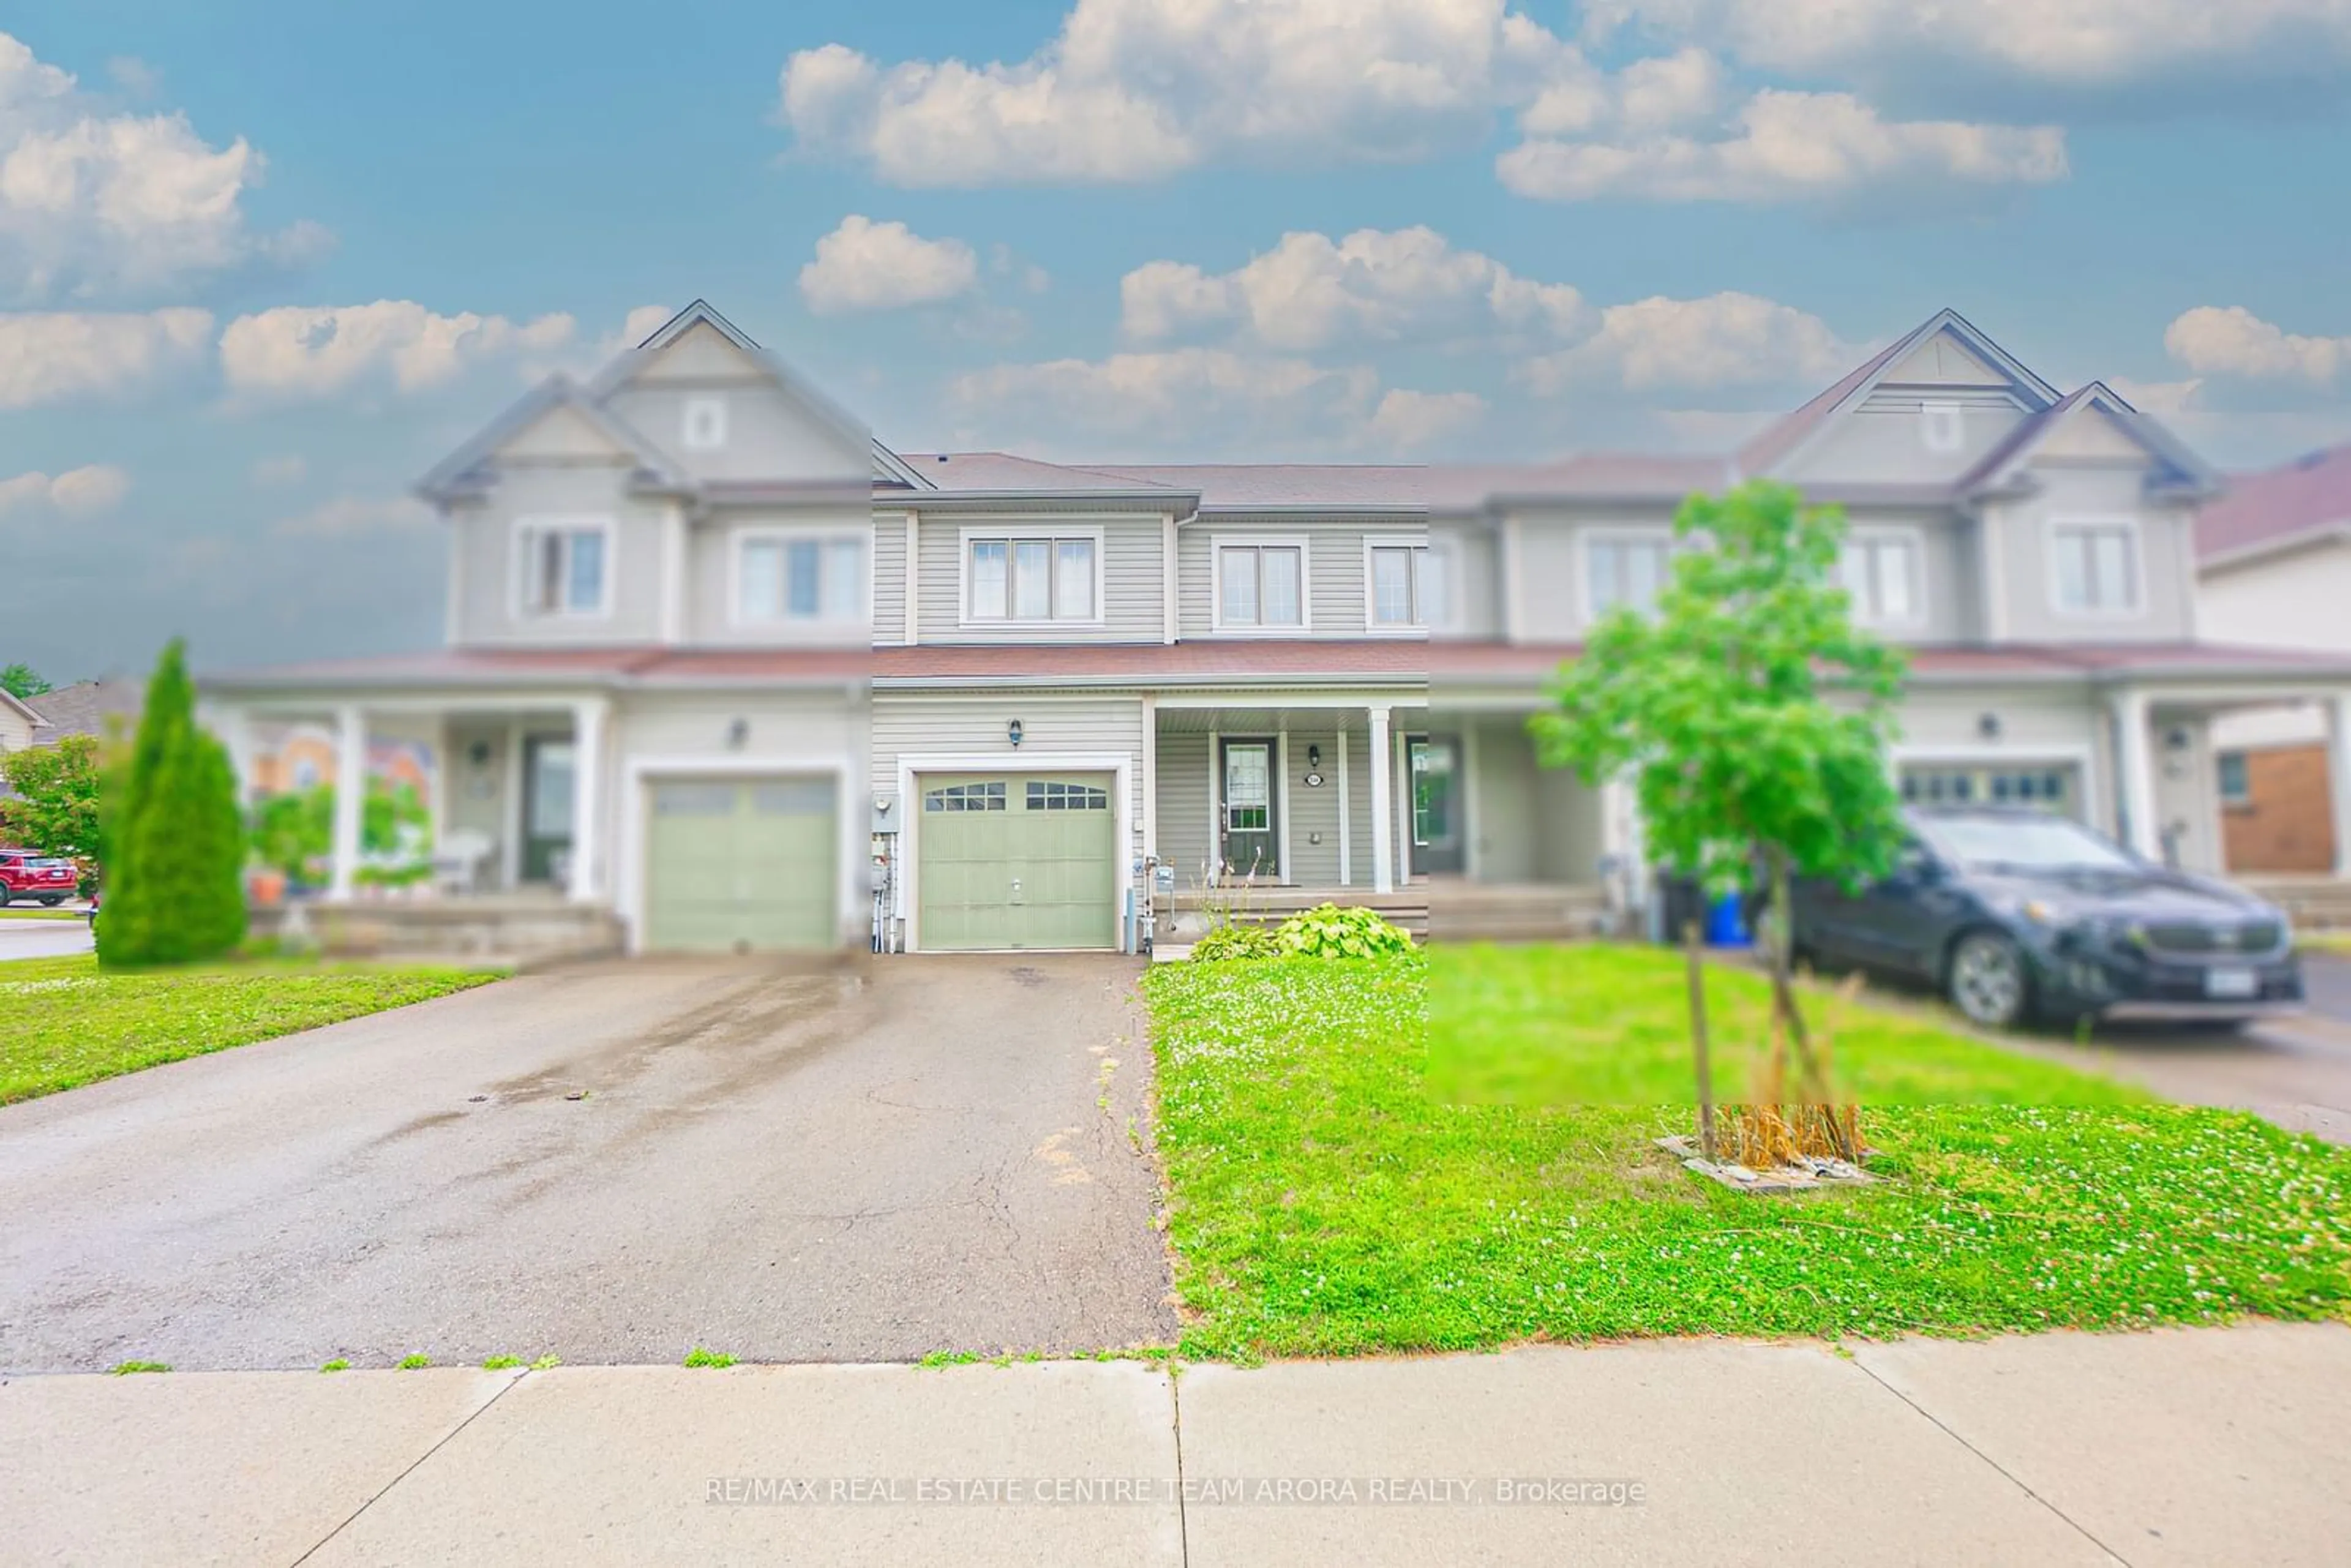 Frontside or backside of a home for 8544 Nightshade St, Niagara Falls Ontario L2H 2Y6